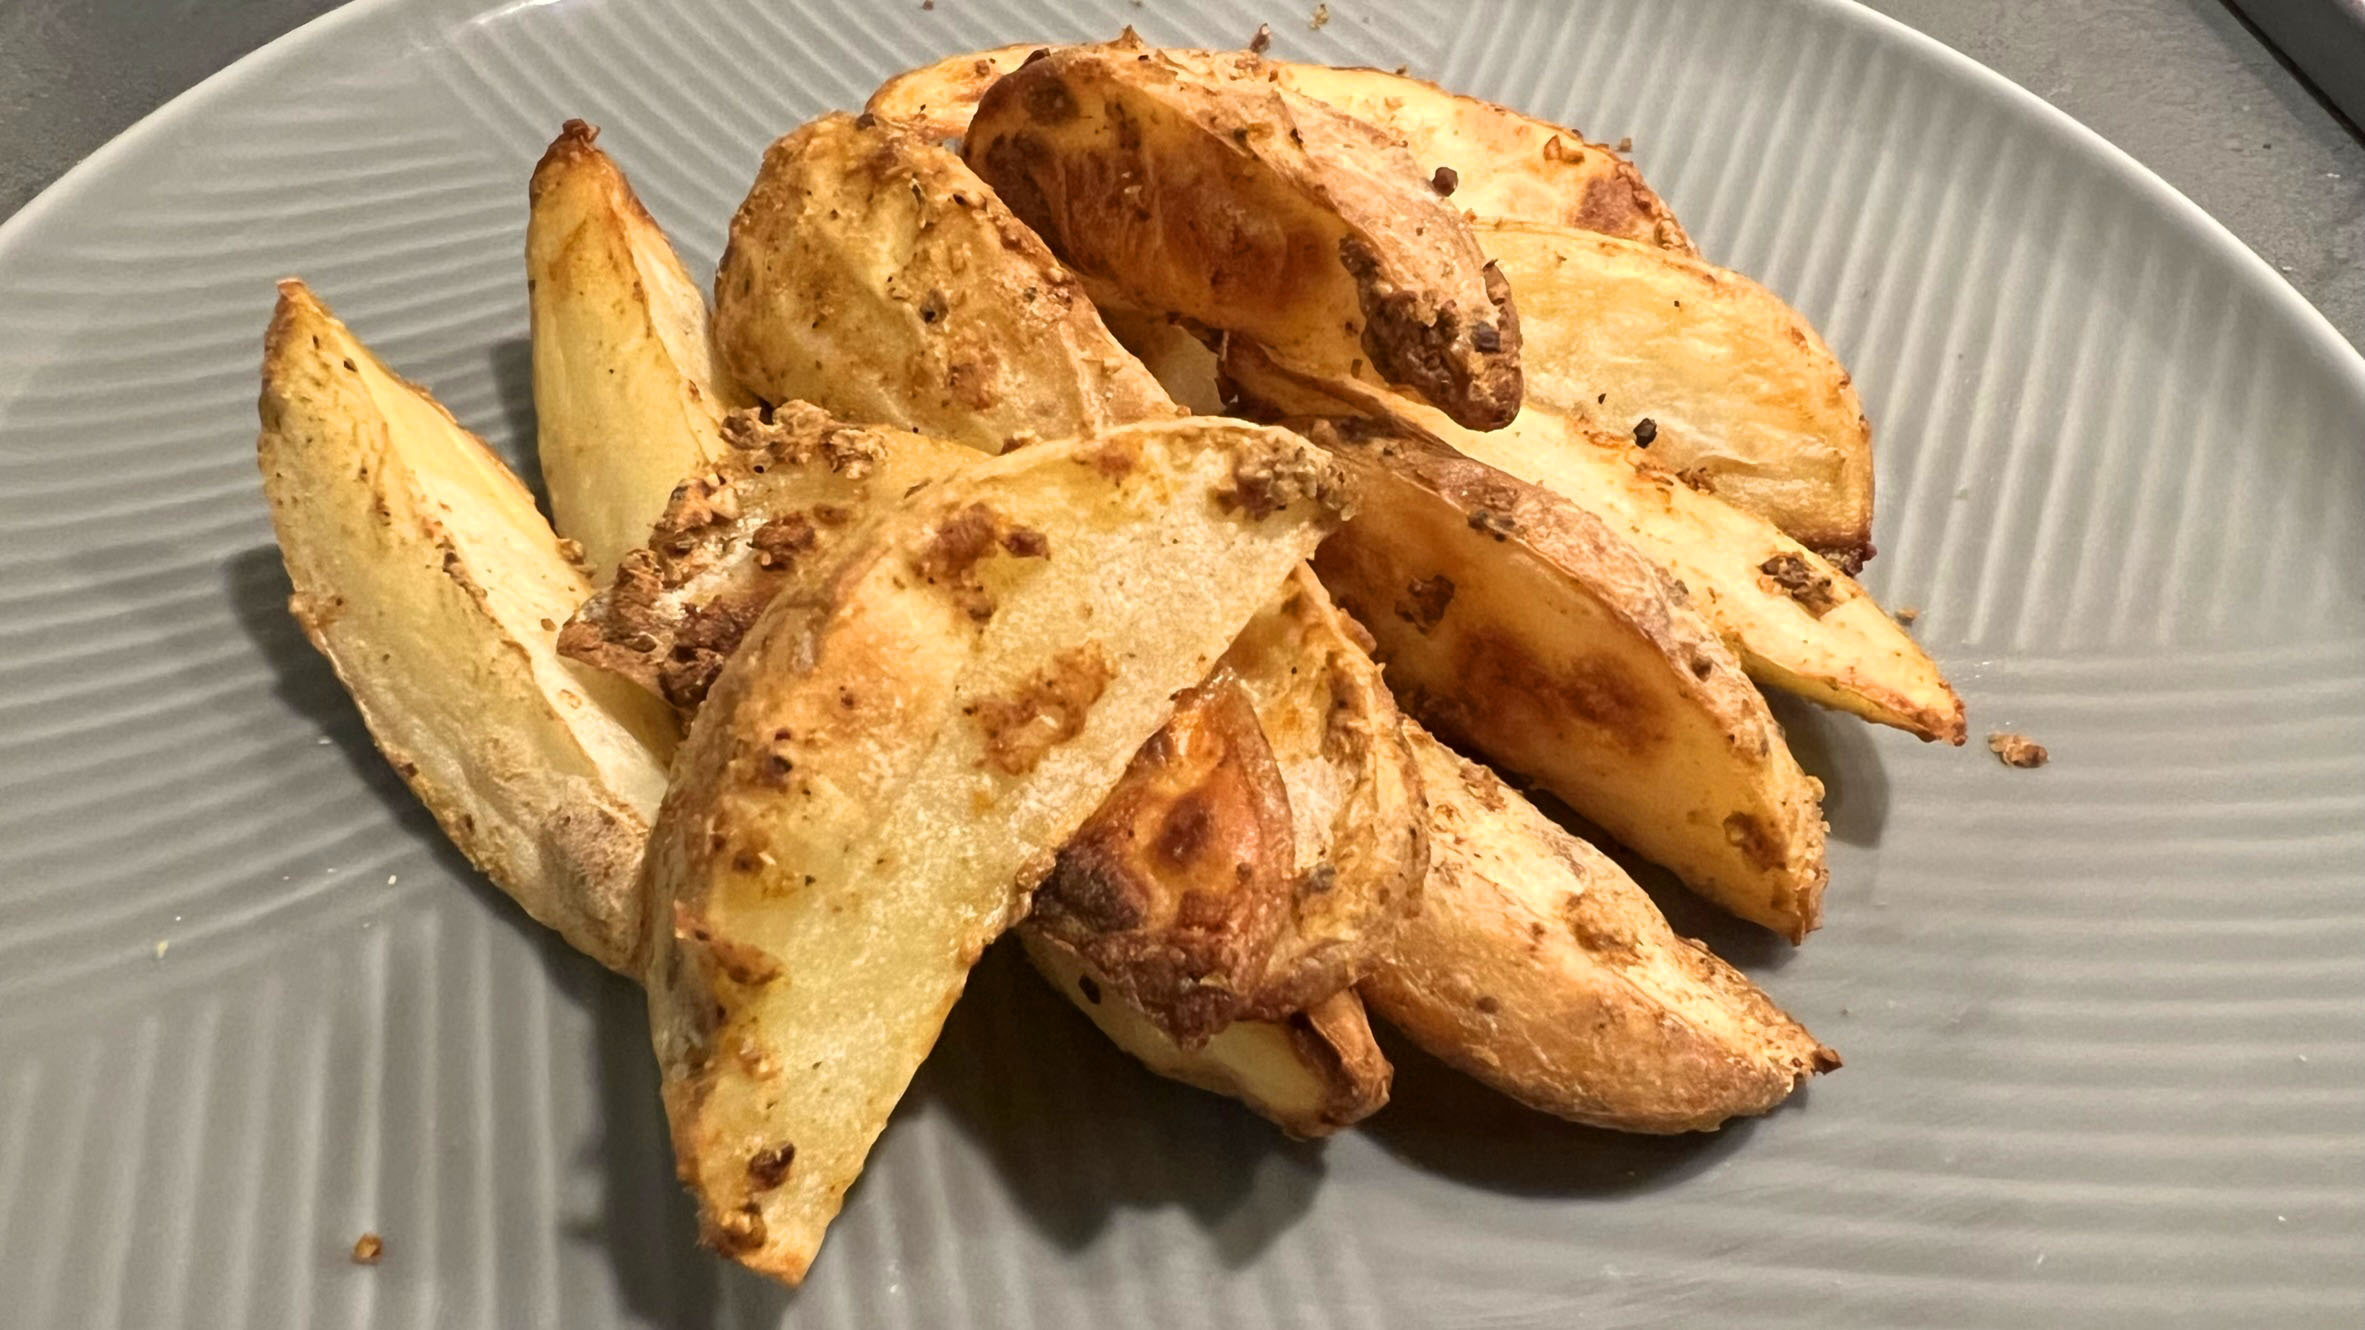 cooked potato wedges on a plate